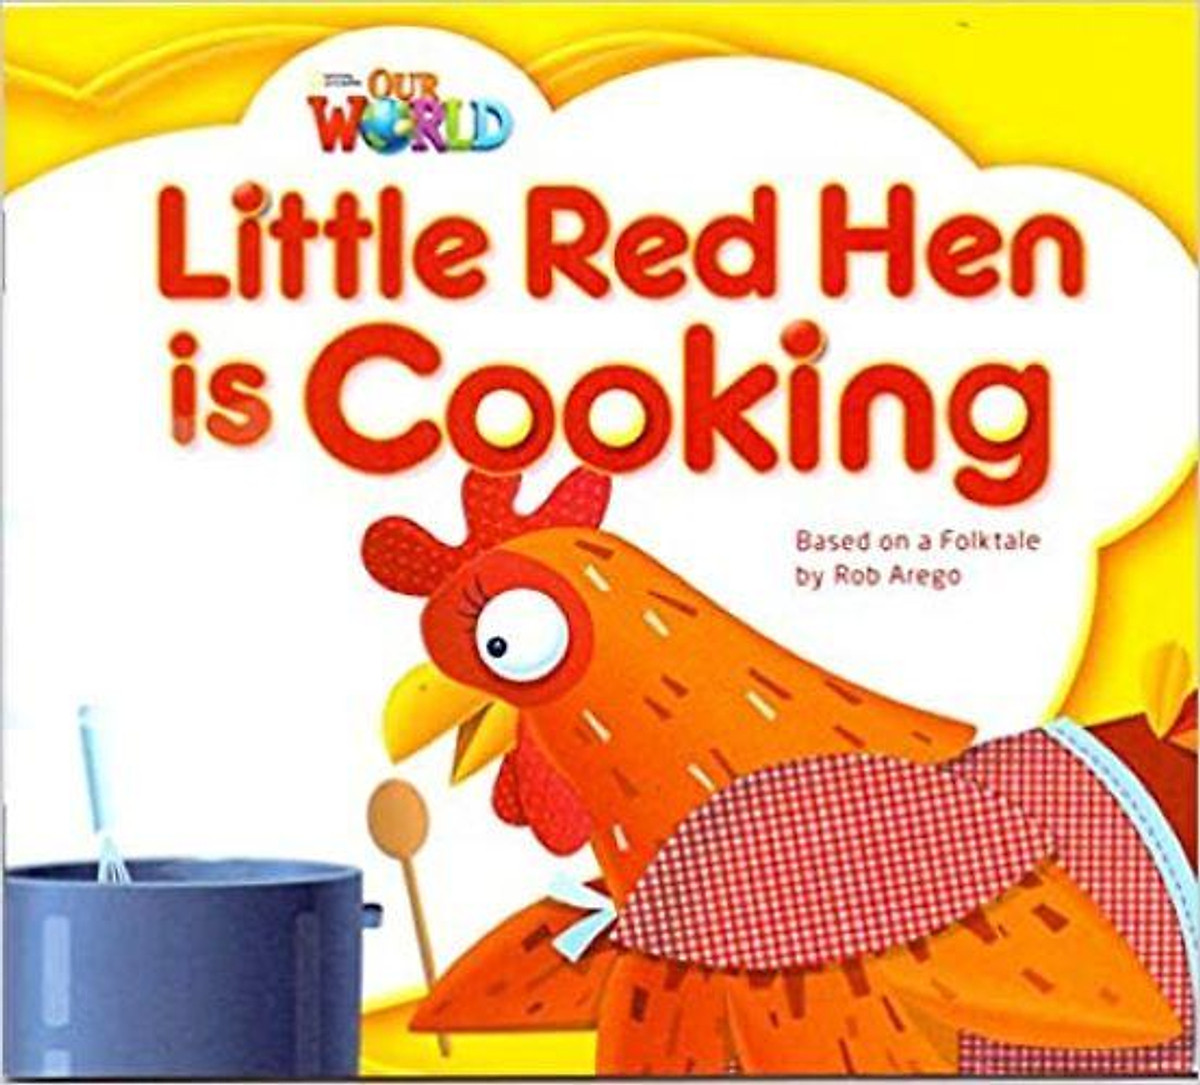 Our World American 1 Little Red Hen Is Cooking